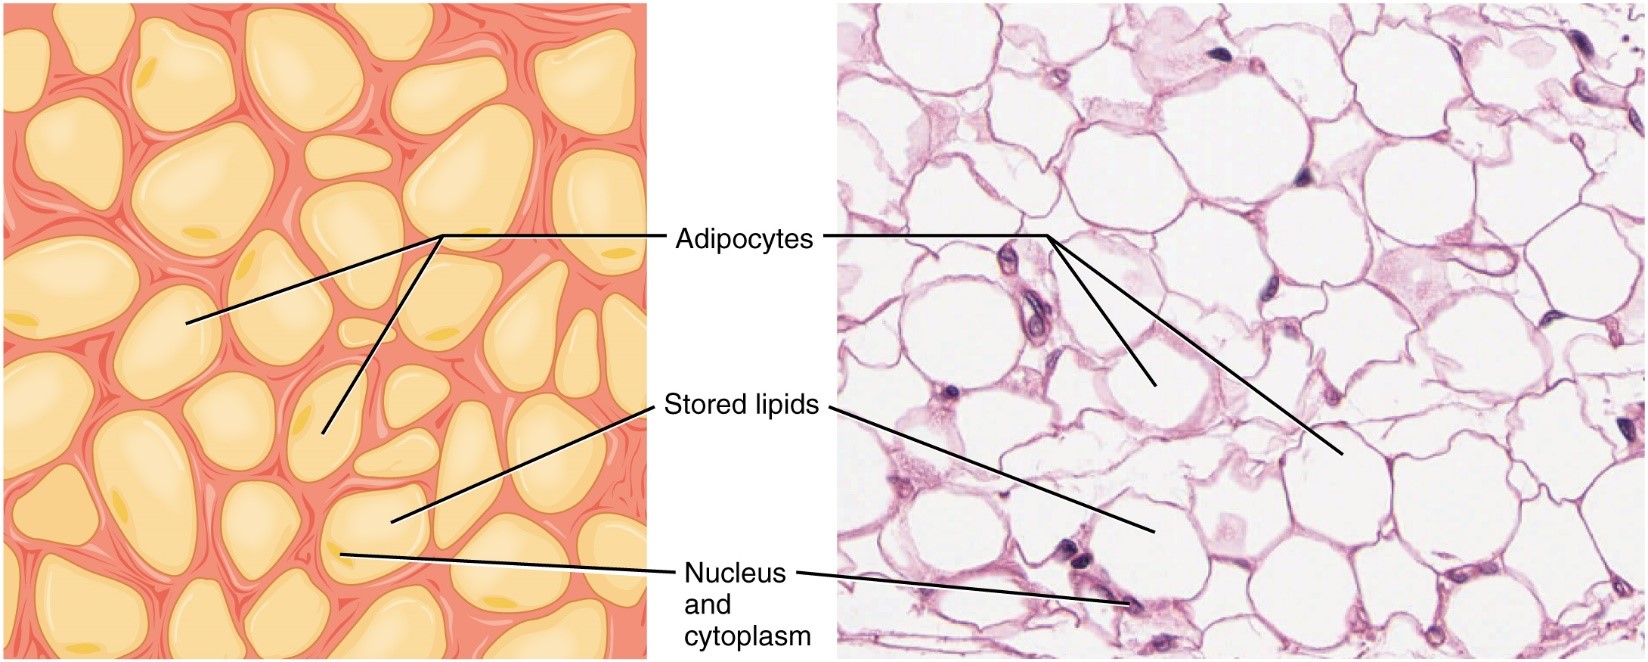 Tissue showing droplet of fat in adipocyte.